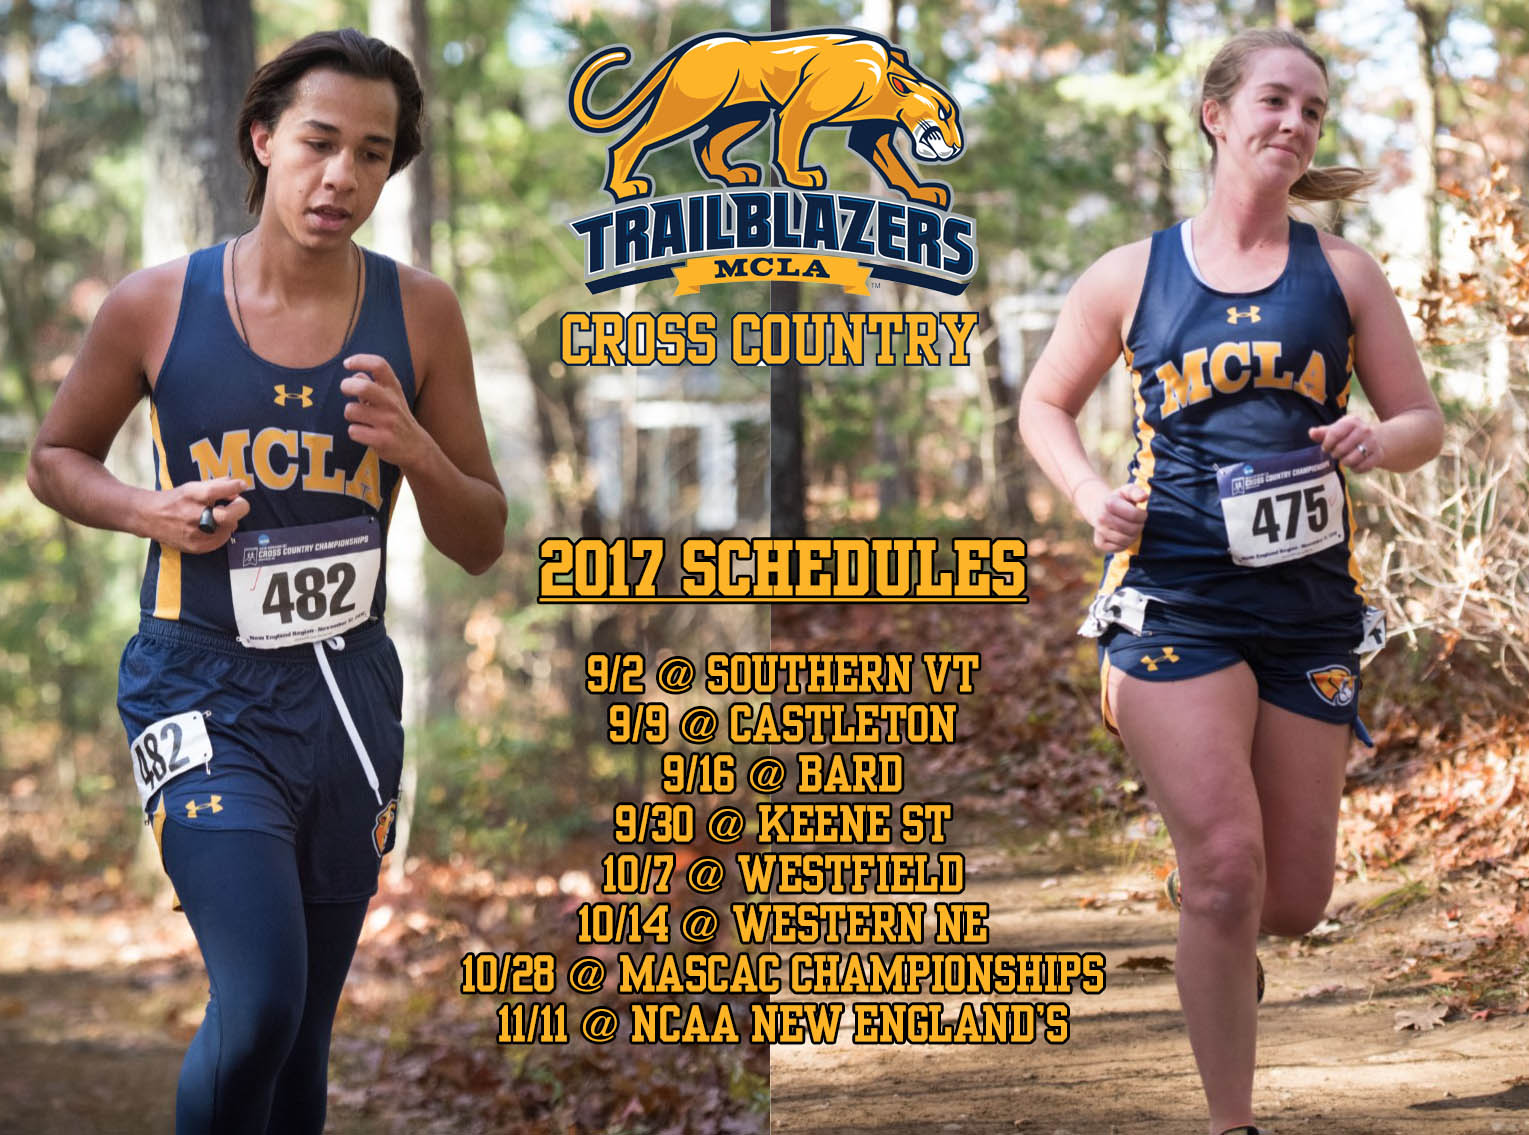 Women's Cross Country selected seventh in MASCAC preseason poll